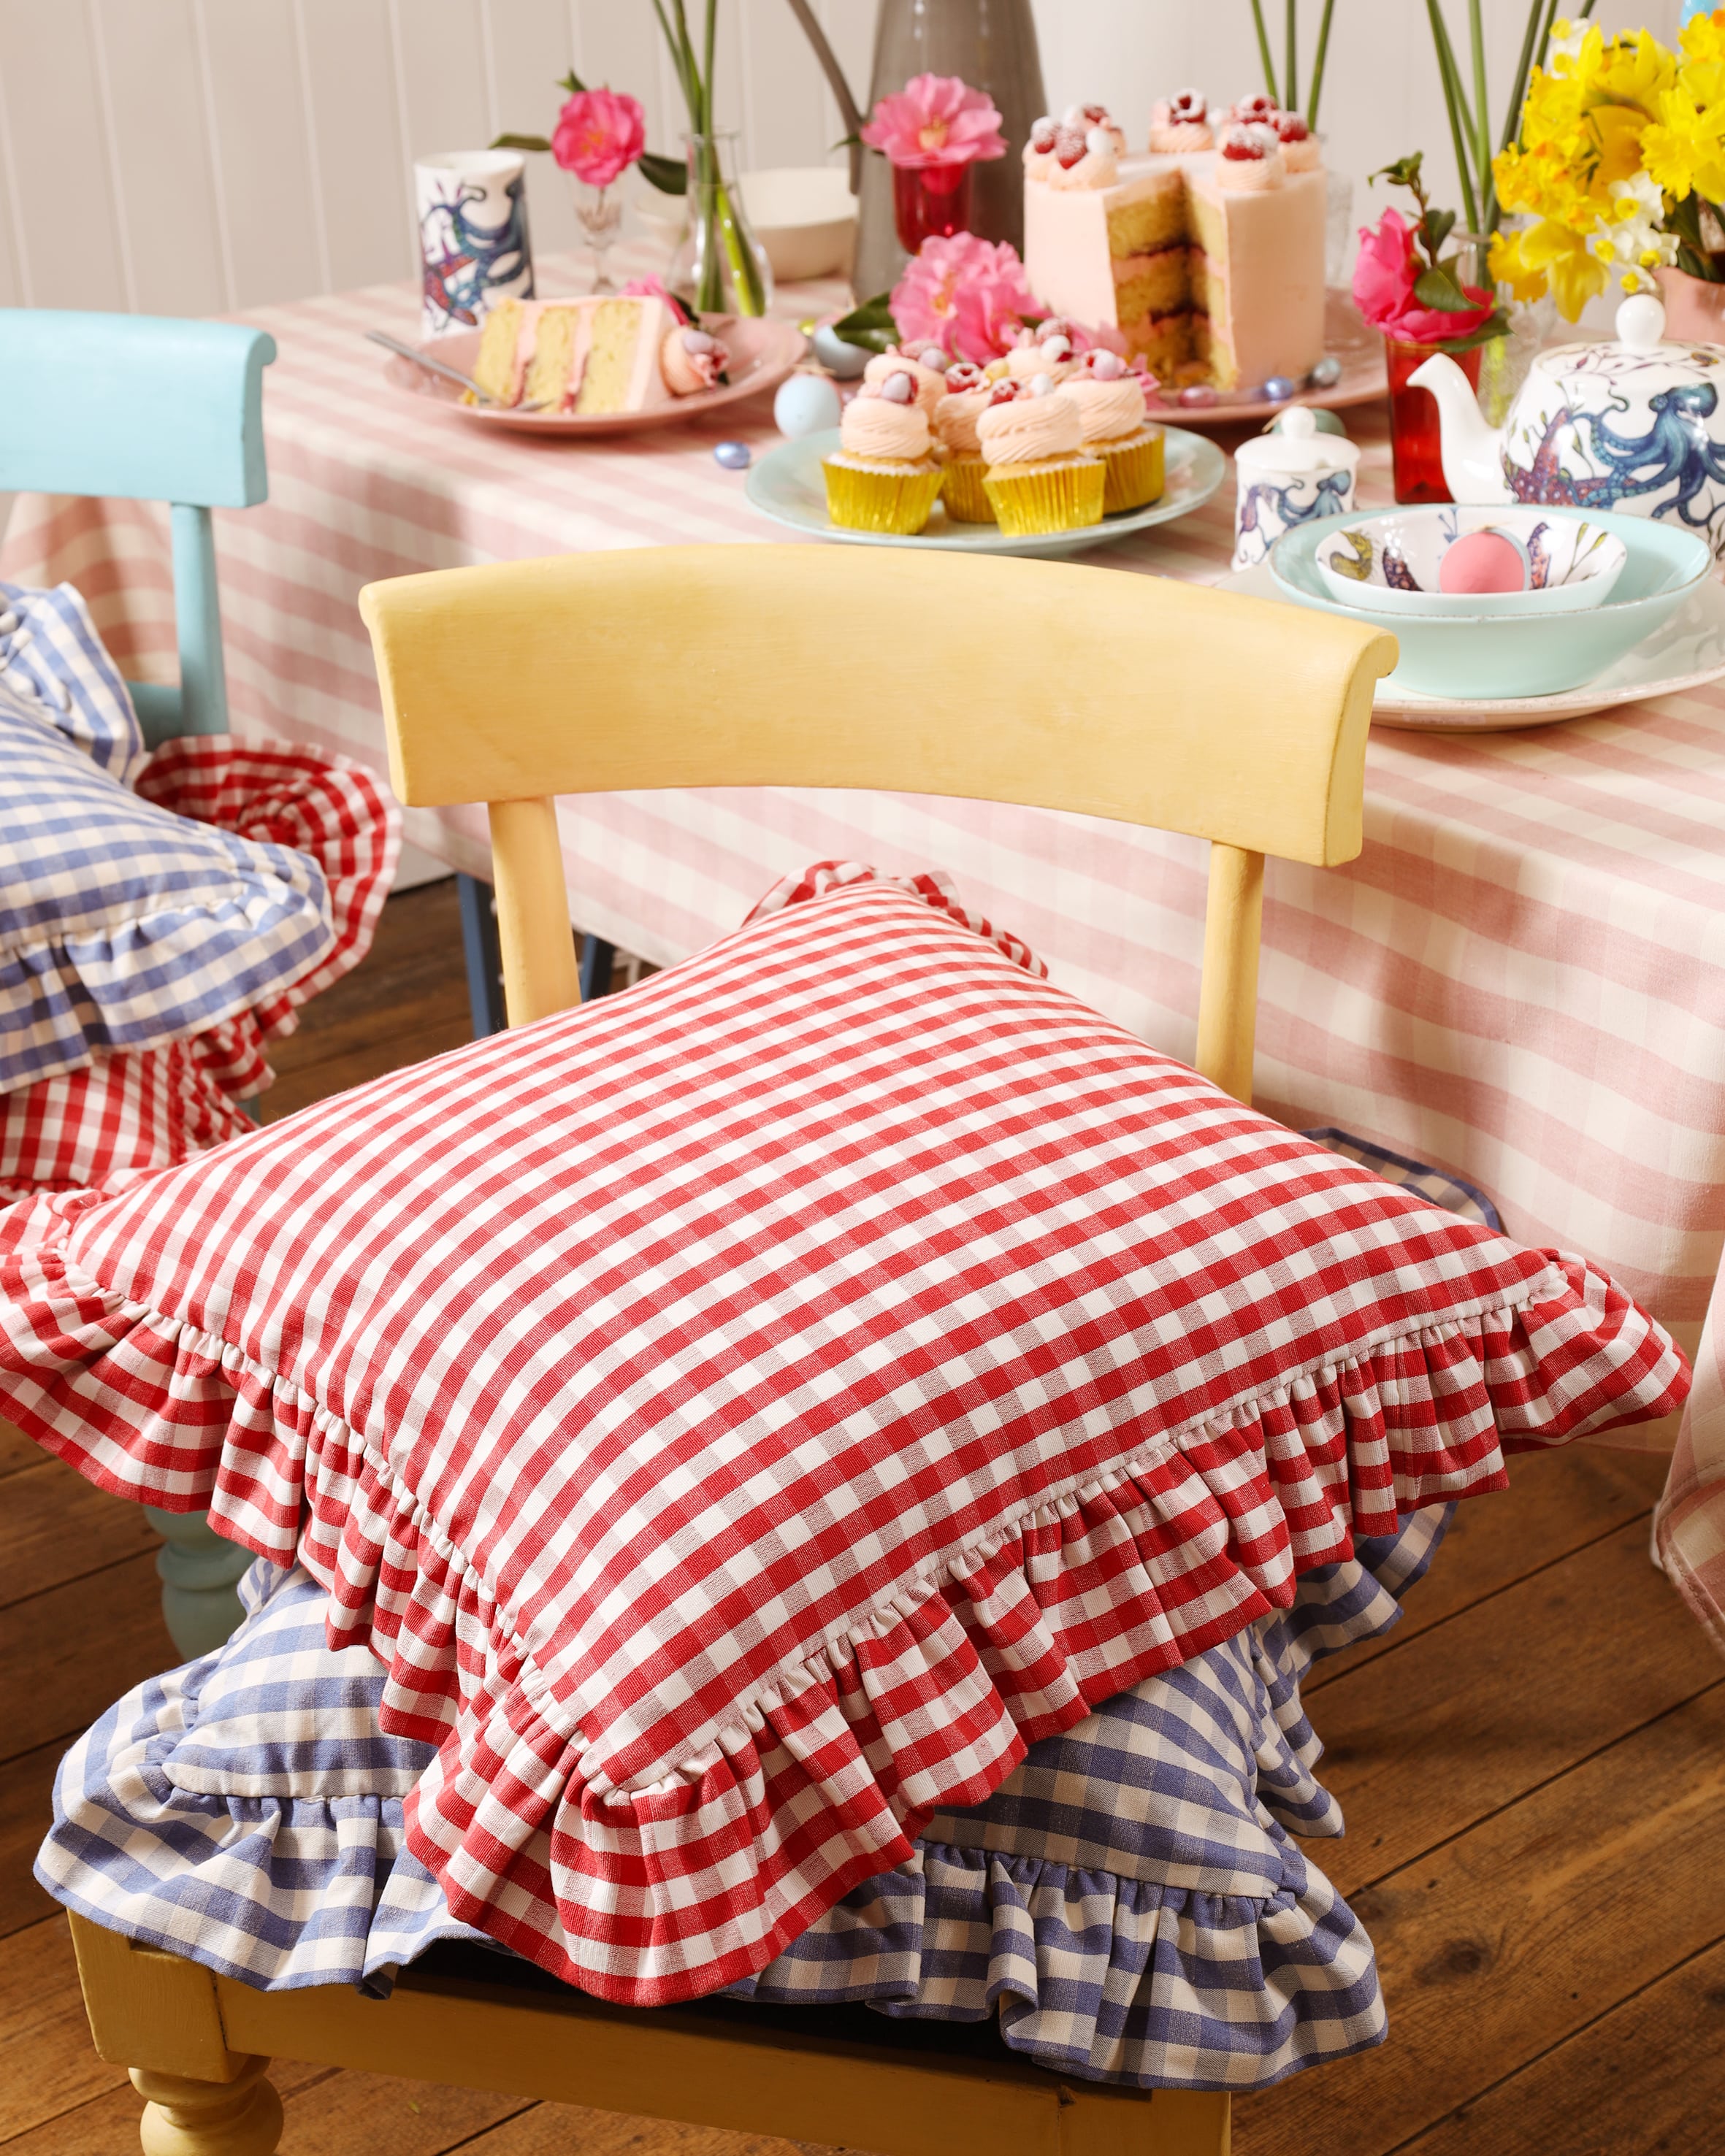 Red Gingham cushion on top of a blue gingham cushion placed on a yellow chair.Behind the chair you can see a table covered with a tablecloth and decorated with cupcakes and other table decorations.